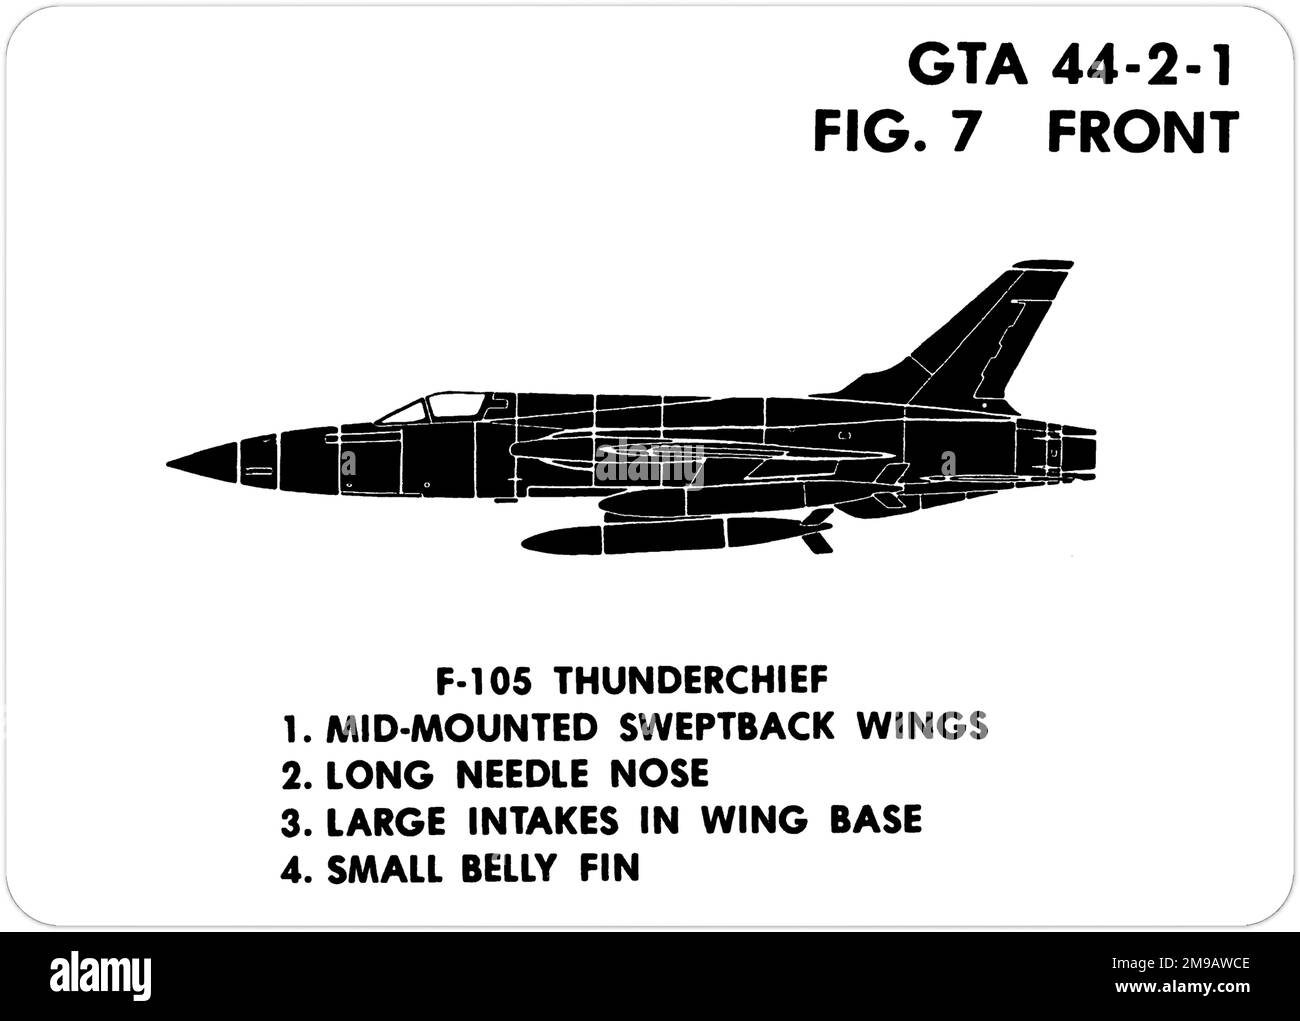 Republic F-105D Thunderchief. This is one of the series of Graphics Training Aids (GTA) used by the United States Army to train their personnel to recognize friendly and hostile aircraft. This particular set, GTA 44-2-1, was issued in July1977. The set features aircraft from: Canada, Italy, United Kingdom, United States, and the USSR. Stock Photo